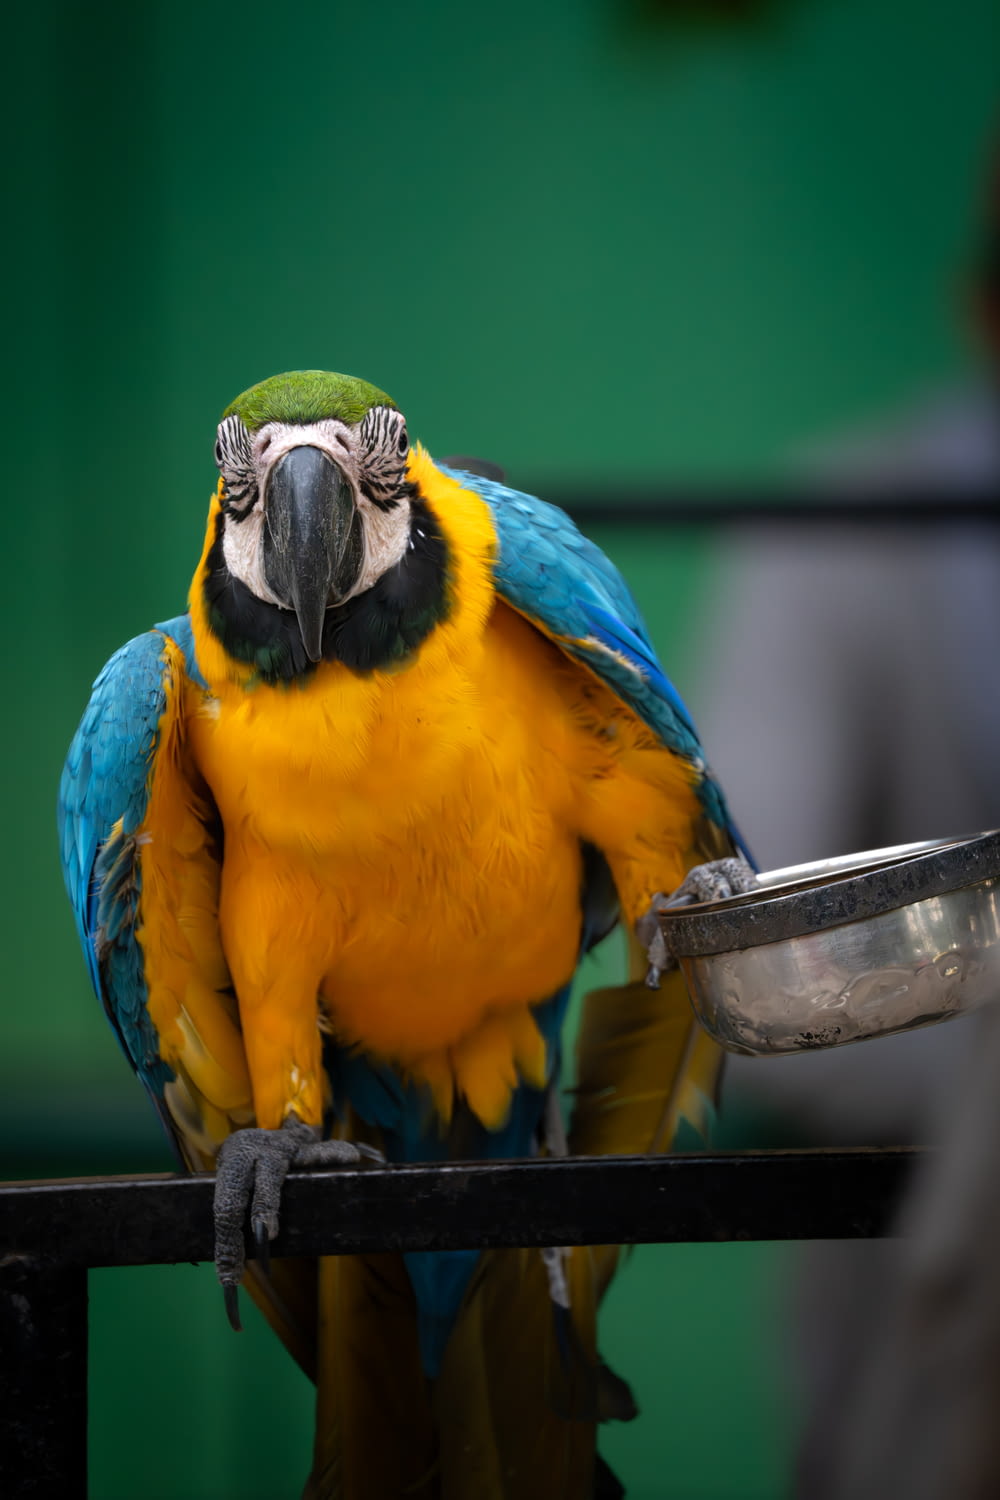 a blue and yellow parrot sitting on top of a metal bar